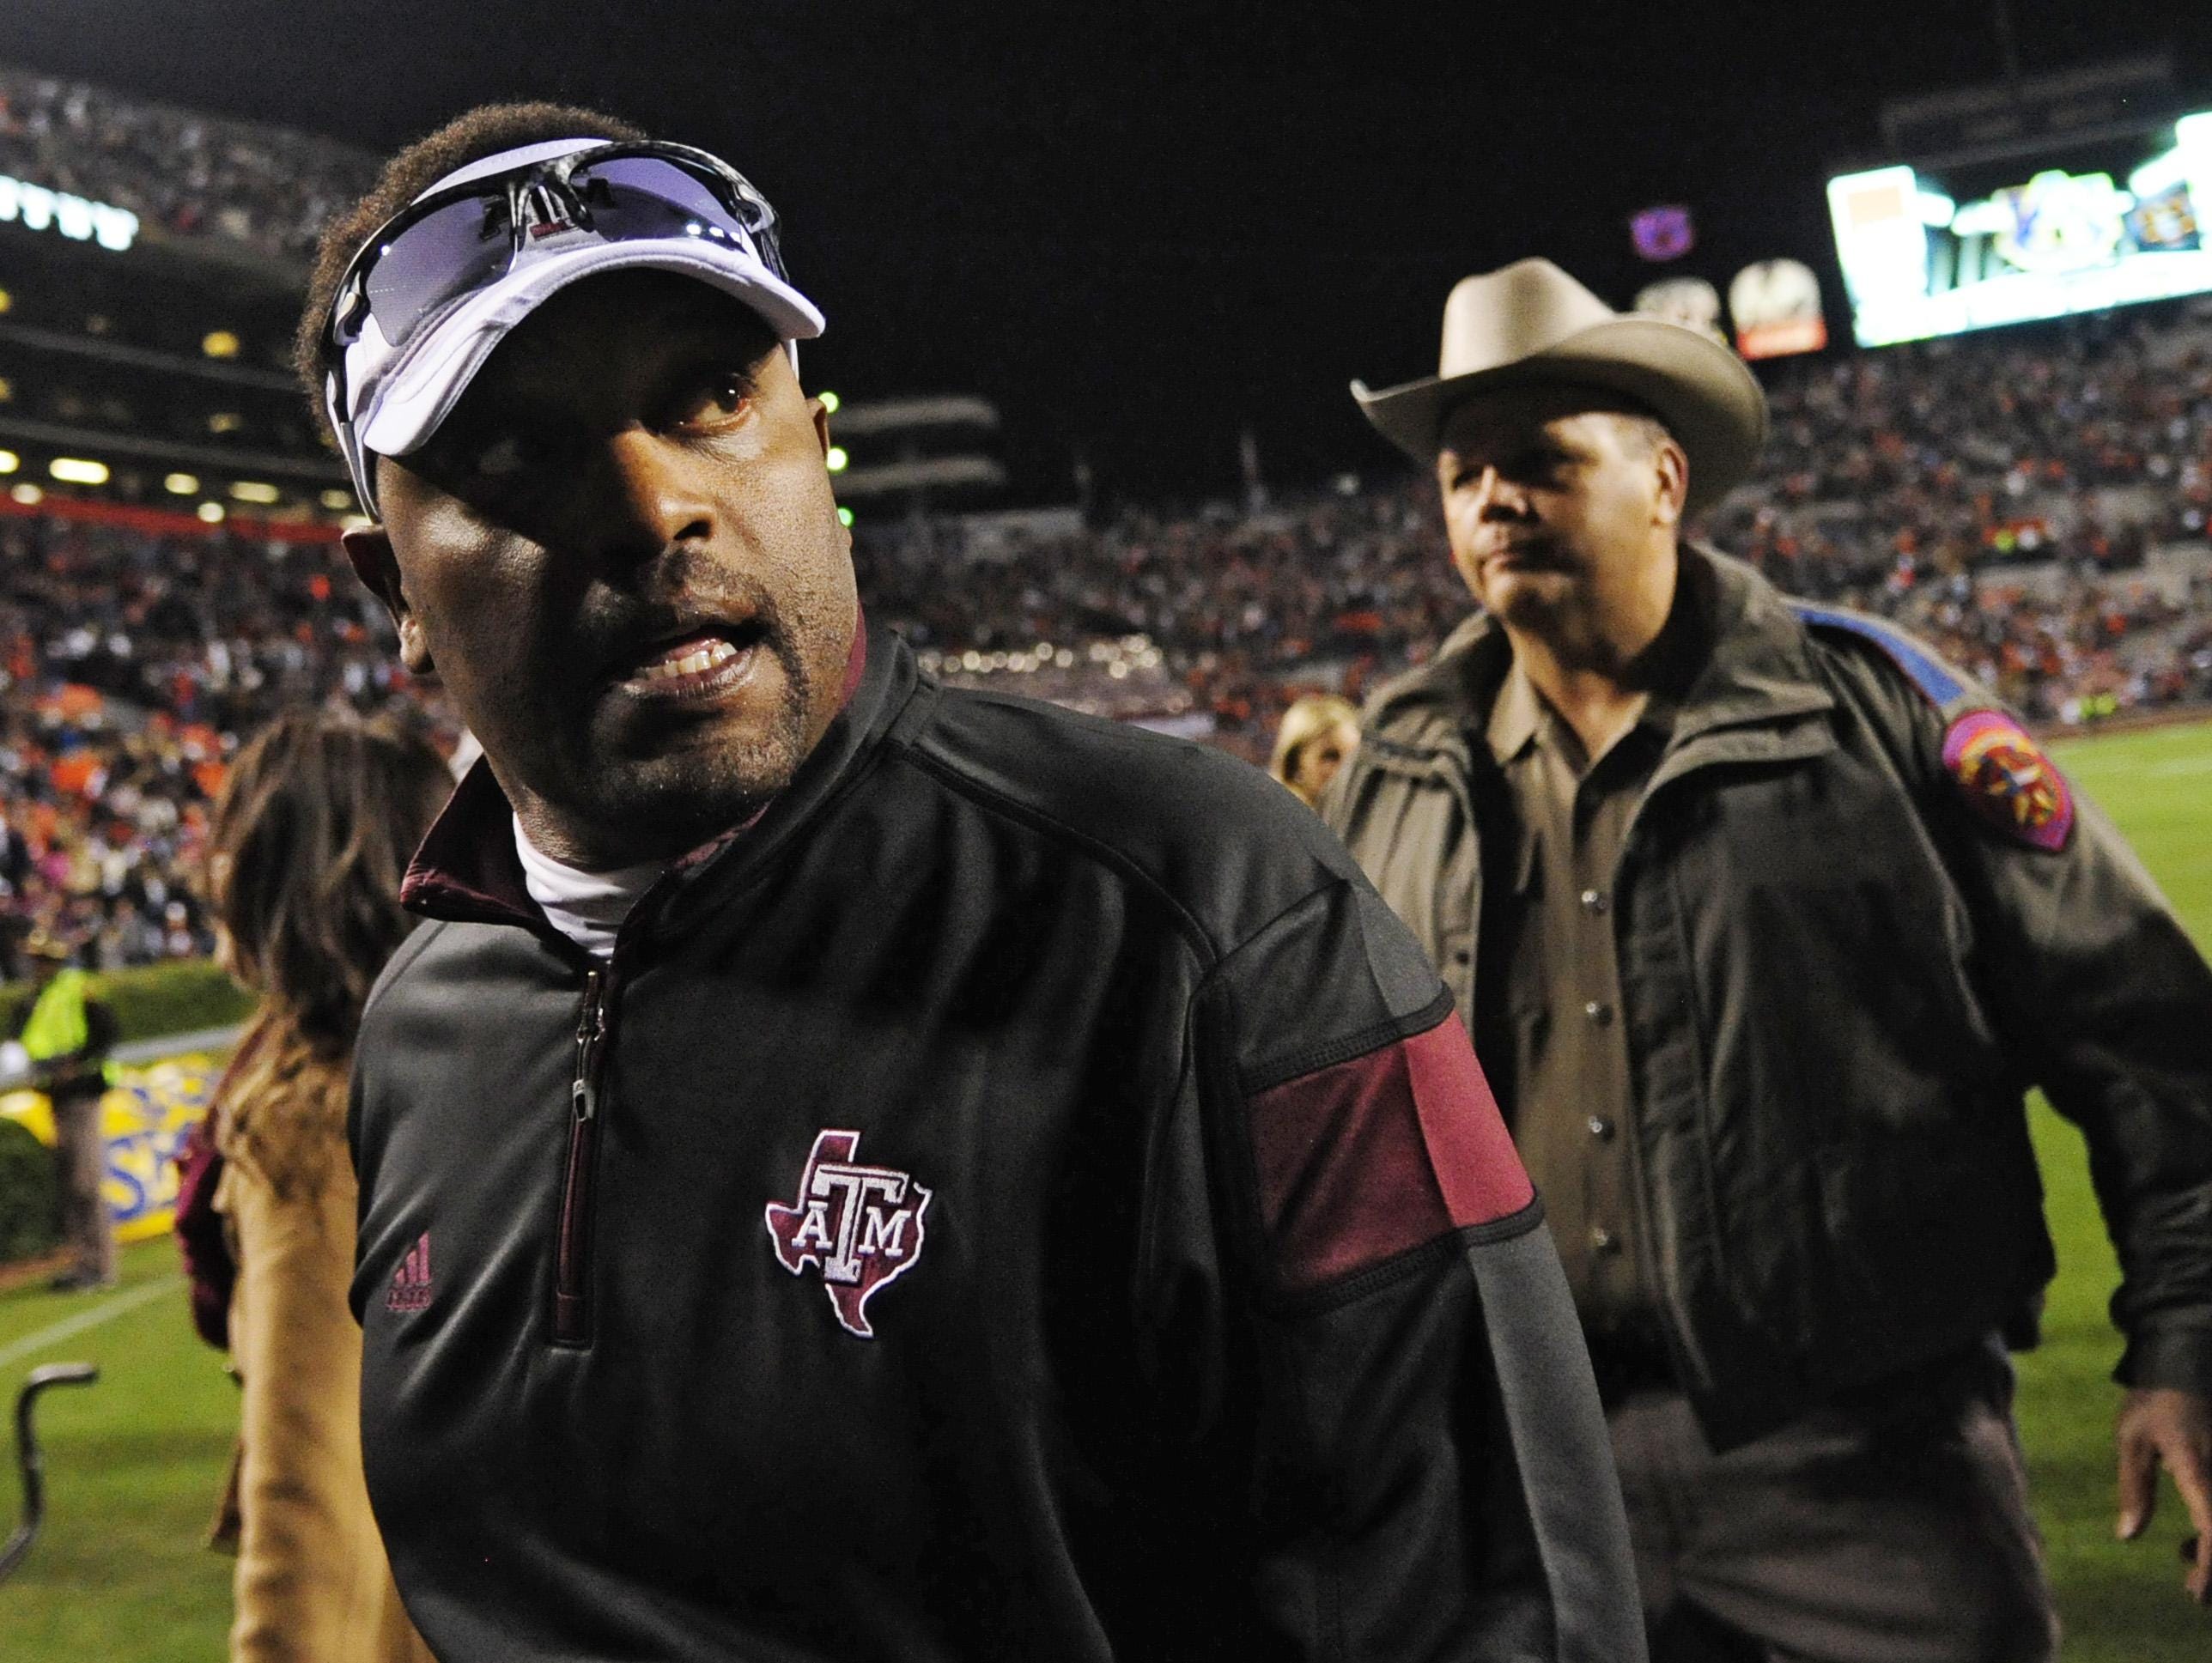 Texas A&M’s Kevin Sumlin is the SEC’s second-highest paid coach at $5 million a season, but has seen the Aggies go from 11-2 his first season to 8-5 in his third.